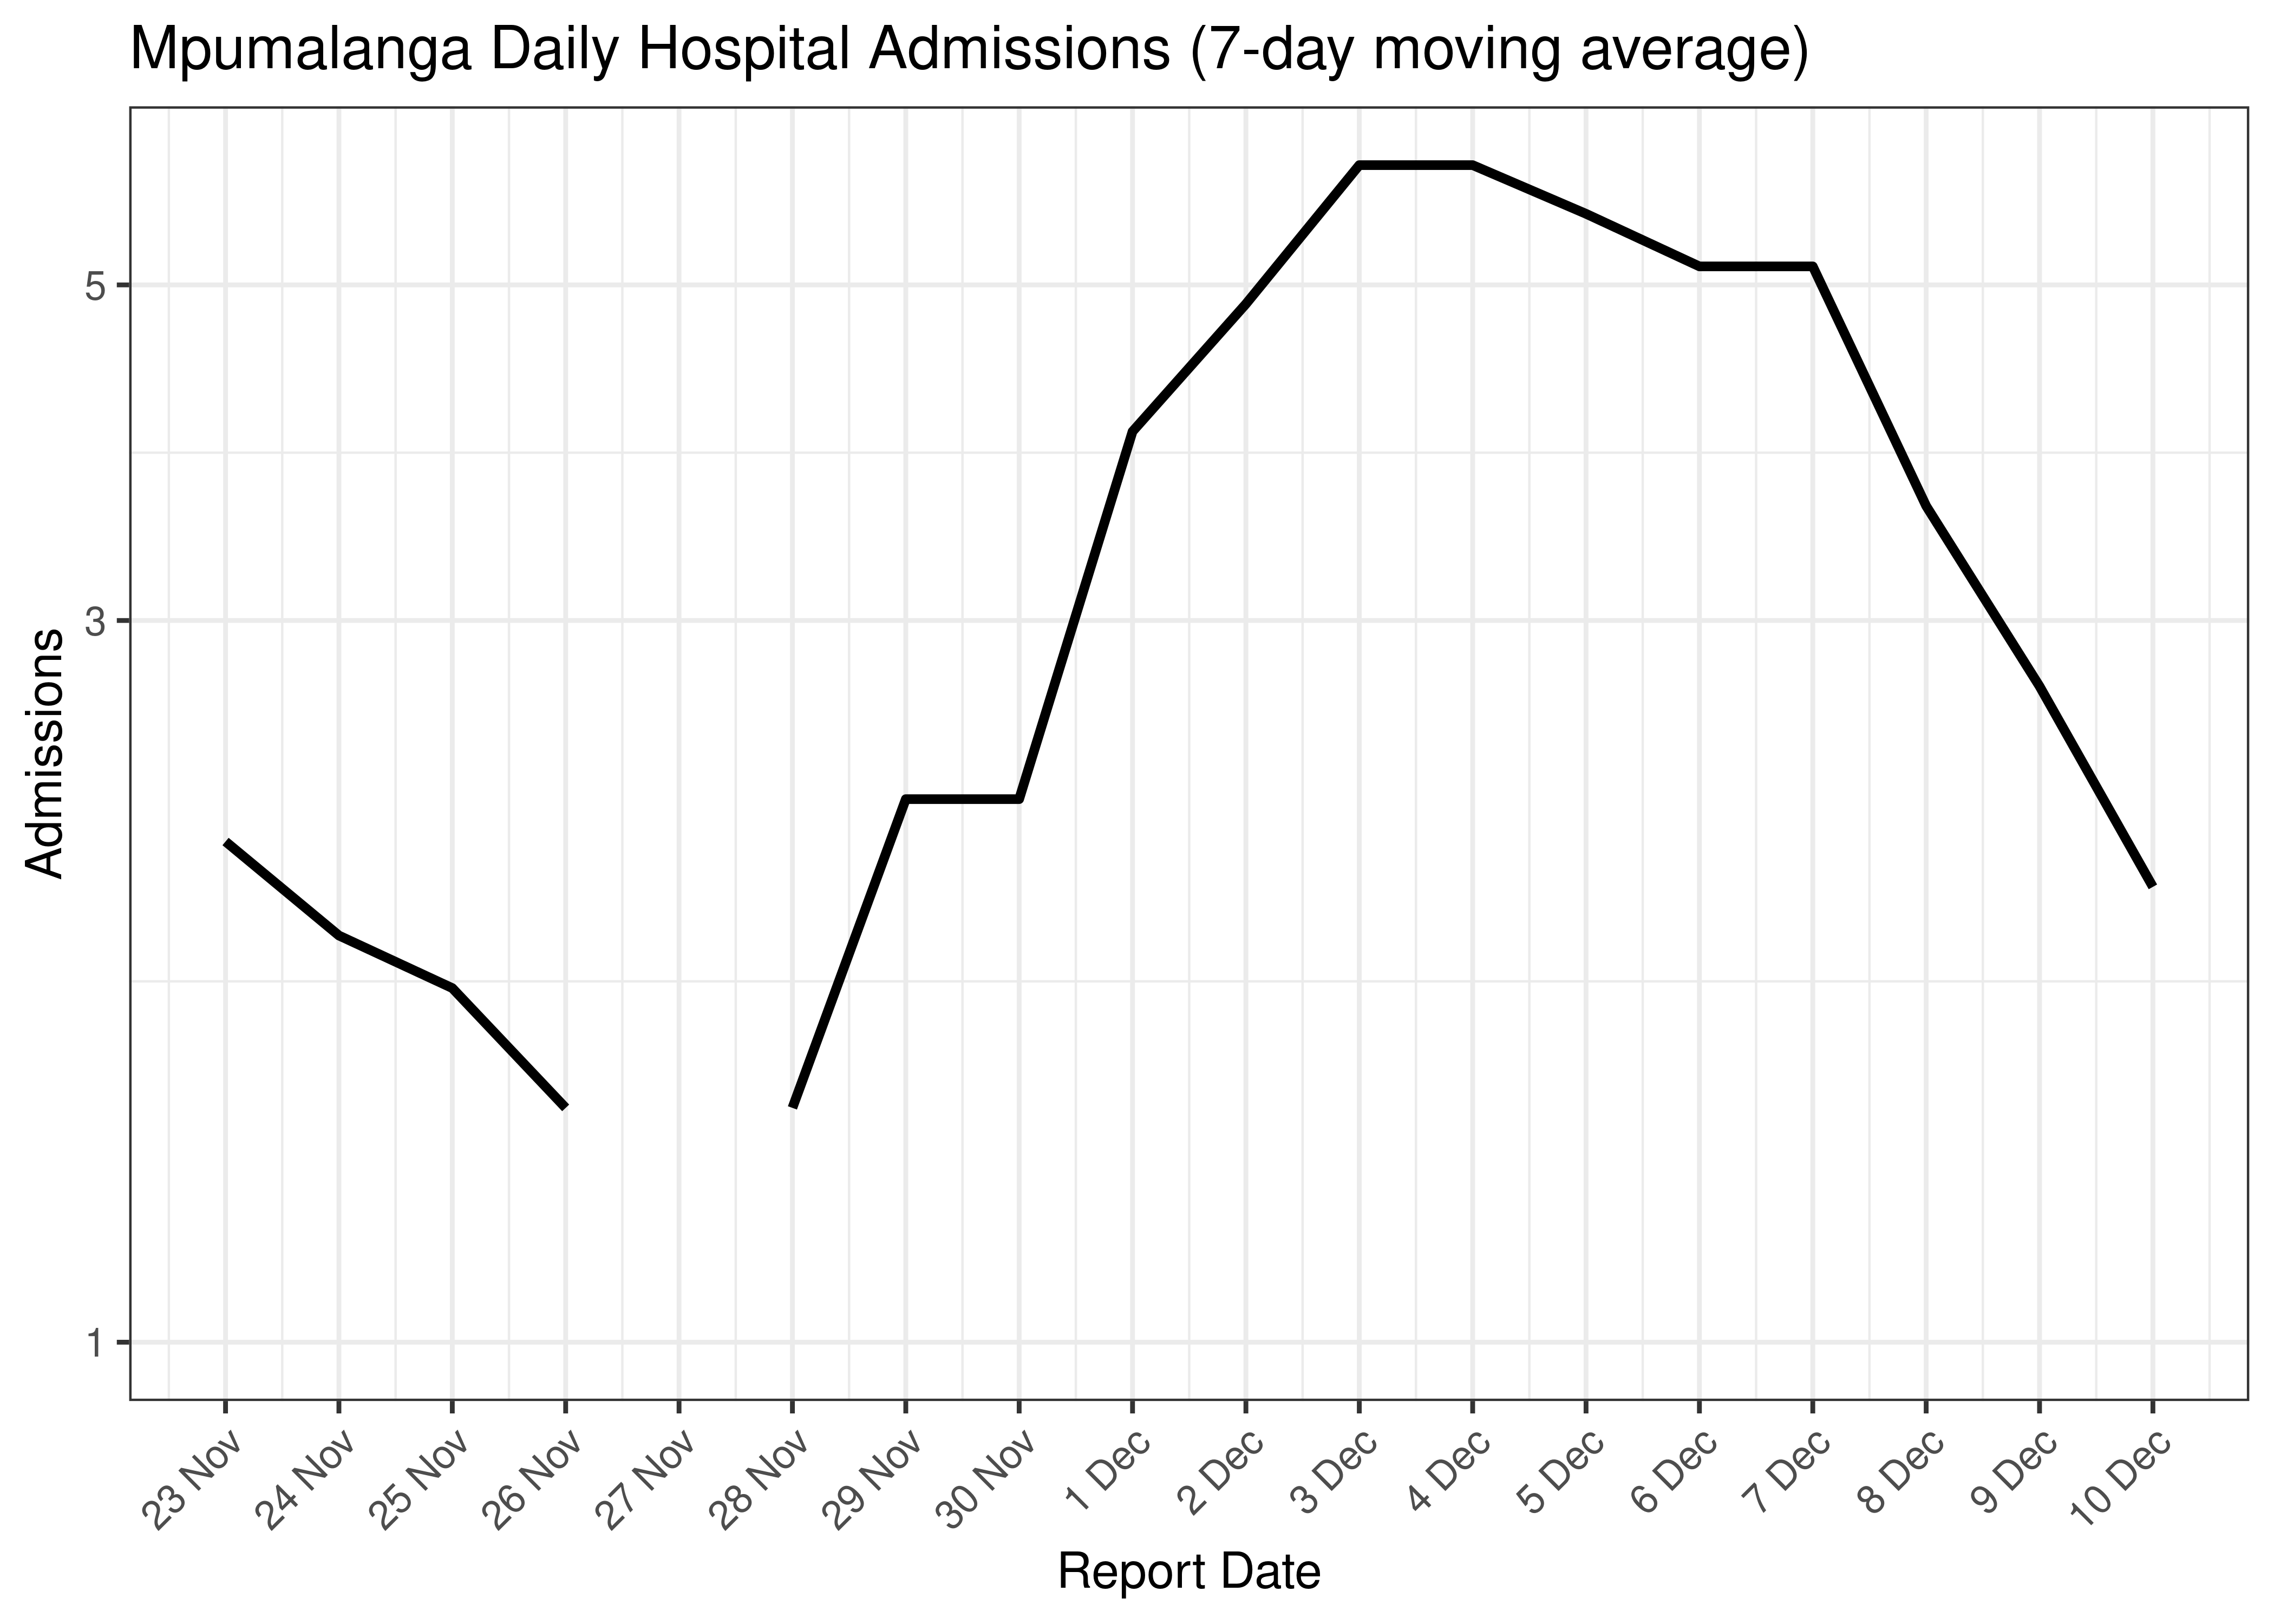 Mpumalanga Daily Hospital Admissions for Last 30-days (7-day moving average)